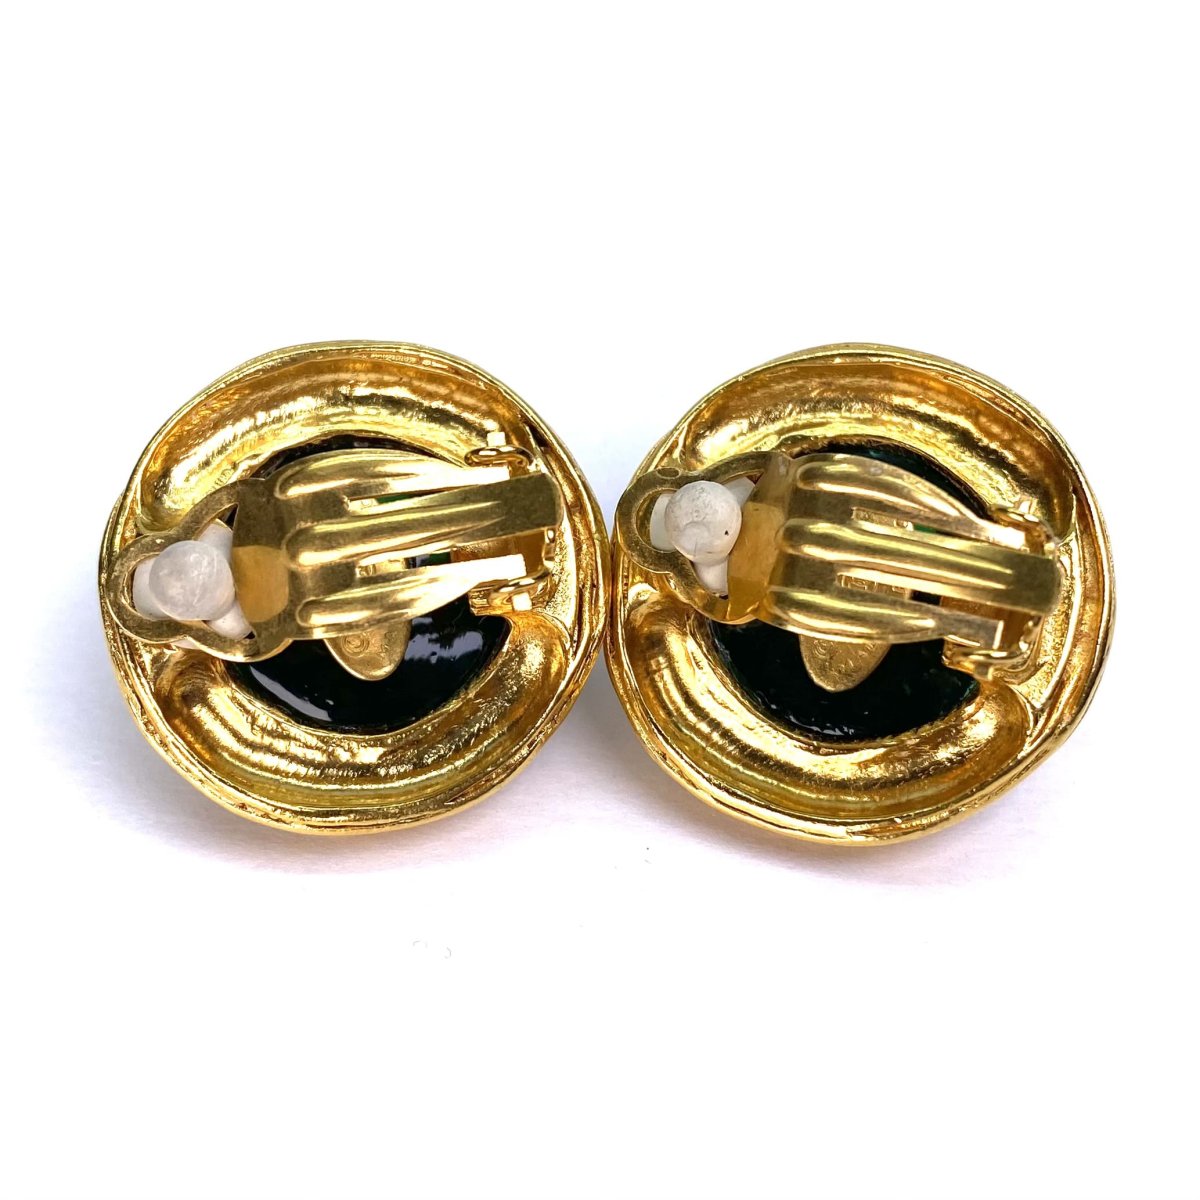 CHANEL グリポア コラボ イヤリング グリーン 1994年秋頃, CHANEL Vintage GRIPOIX Earring 1994  Autumn collection /, 2212290 - LAYER VINTAGE